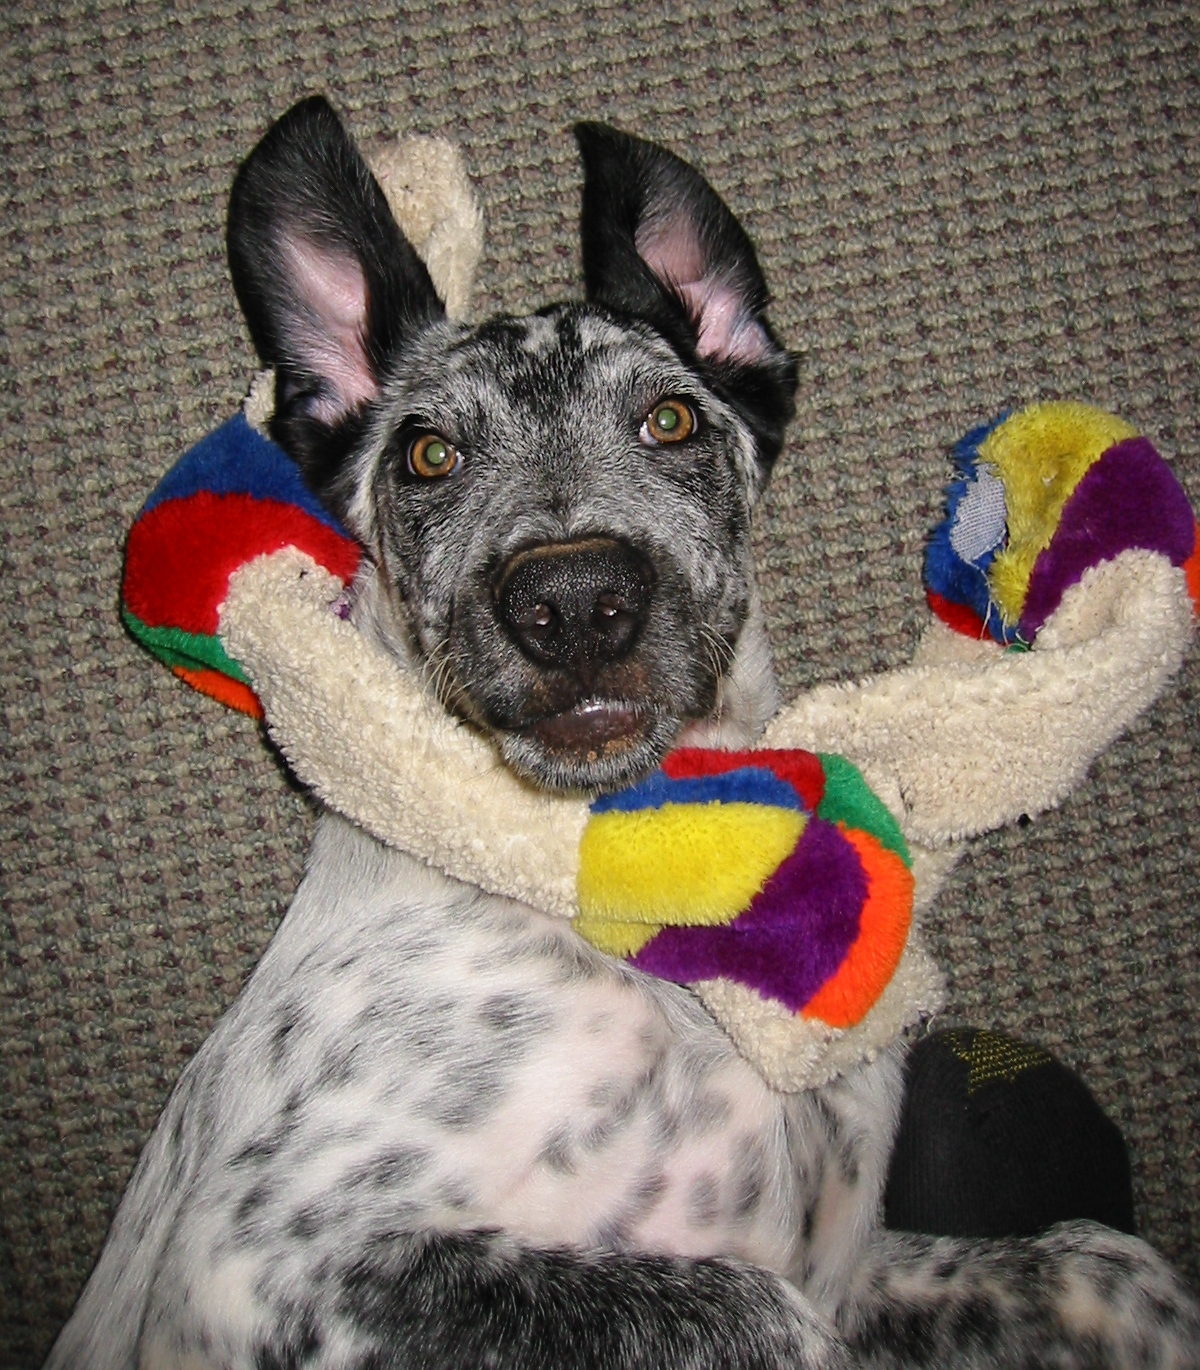 Darrell the Catahoula Leopard Dog at 6 Months